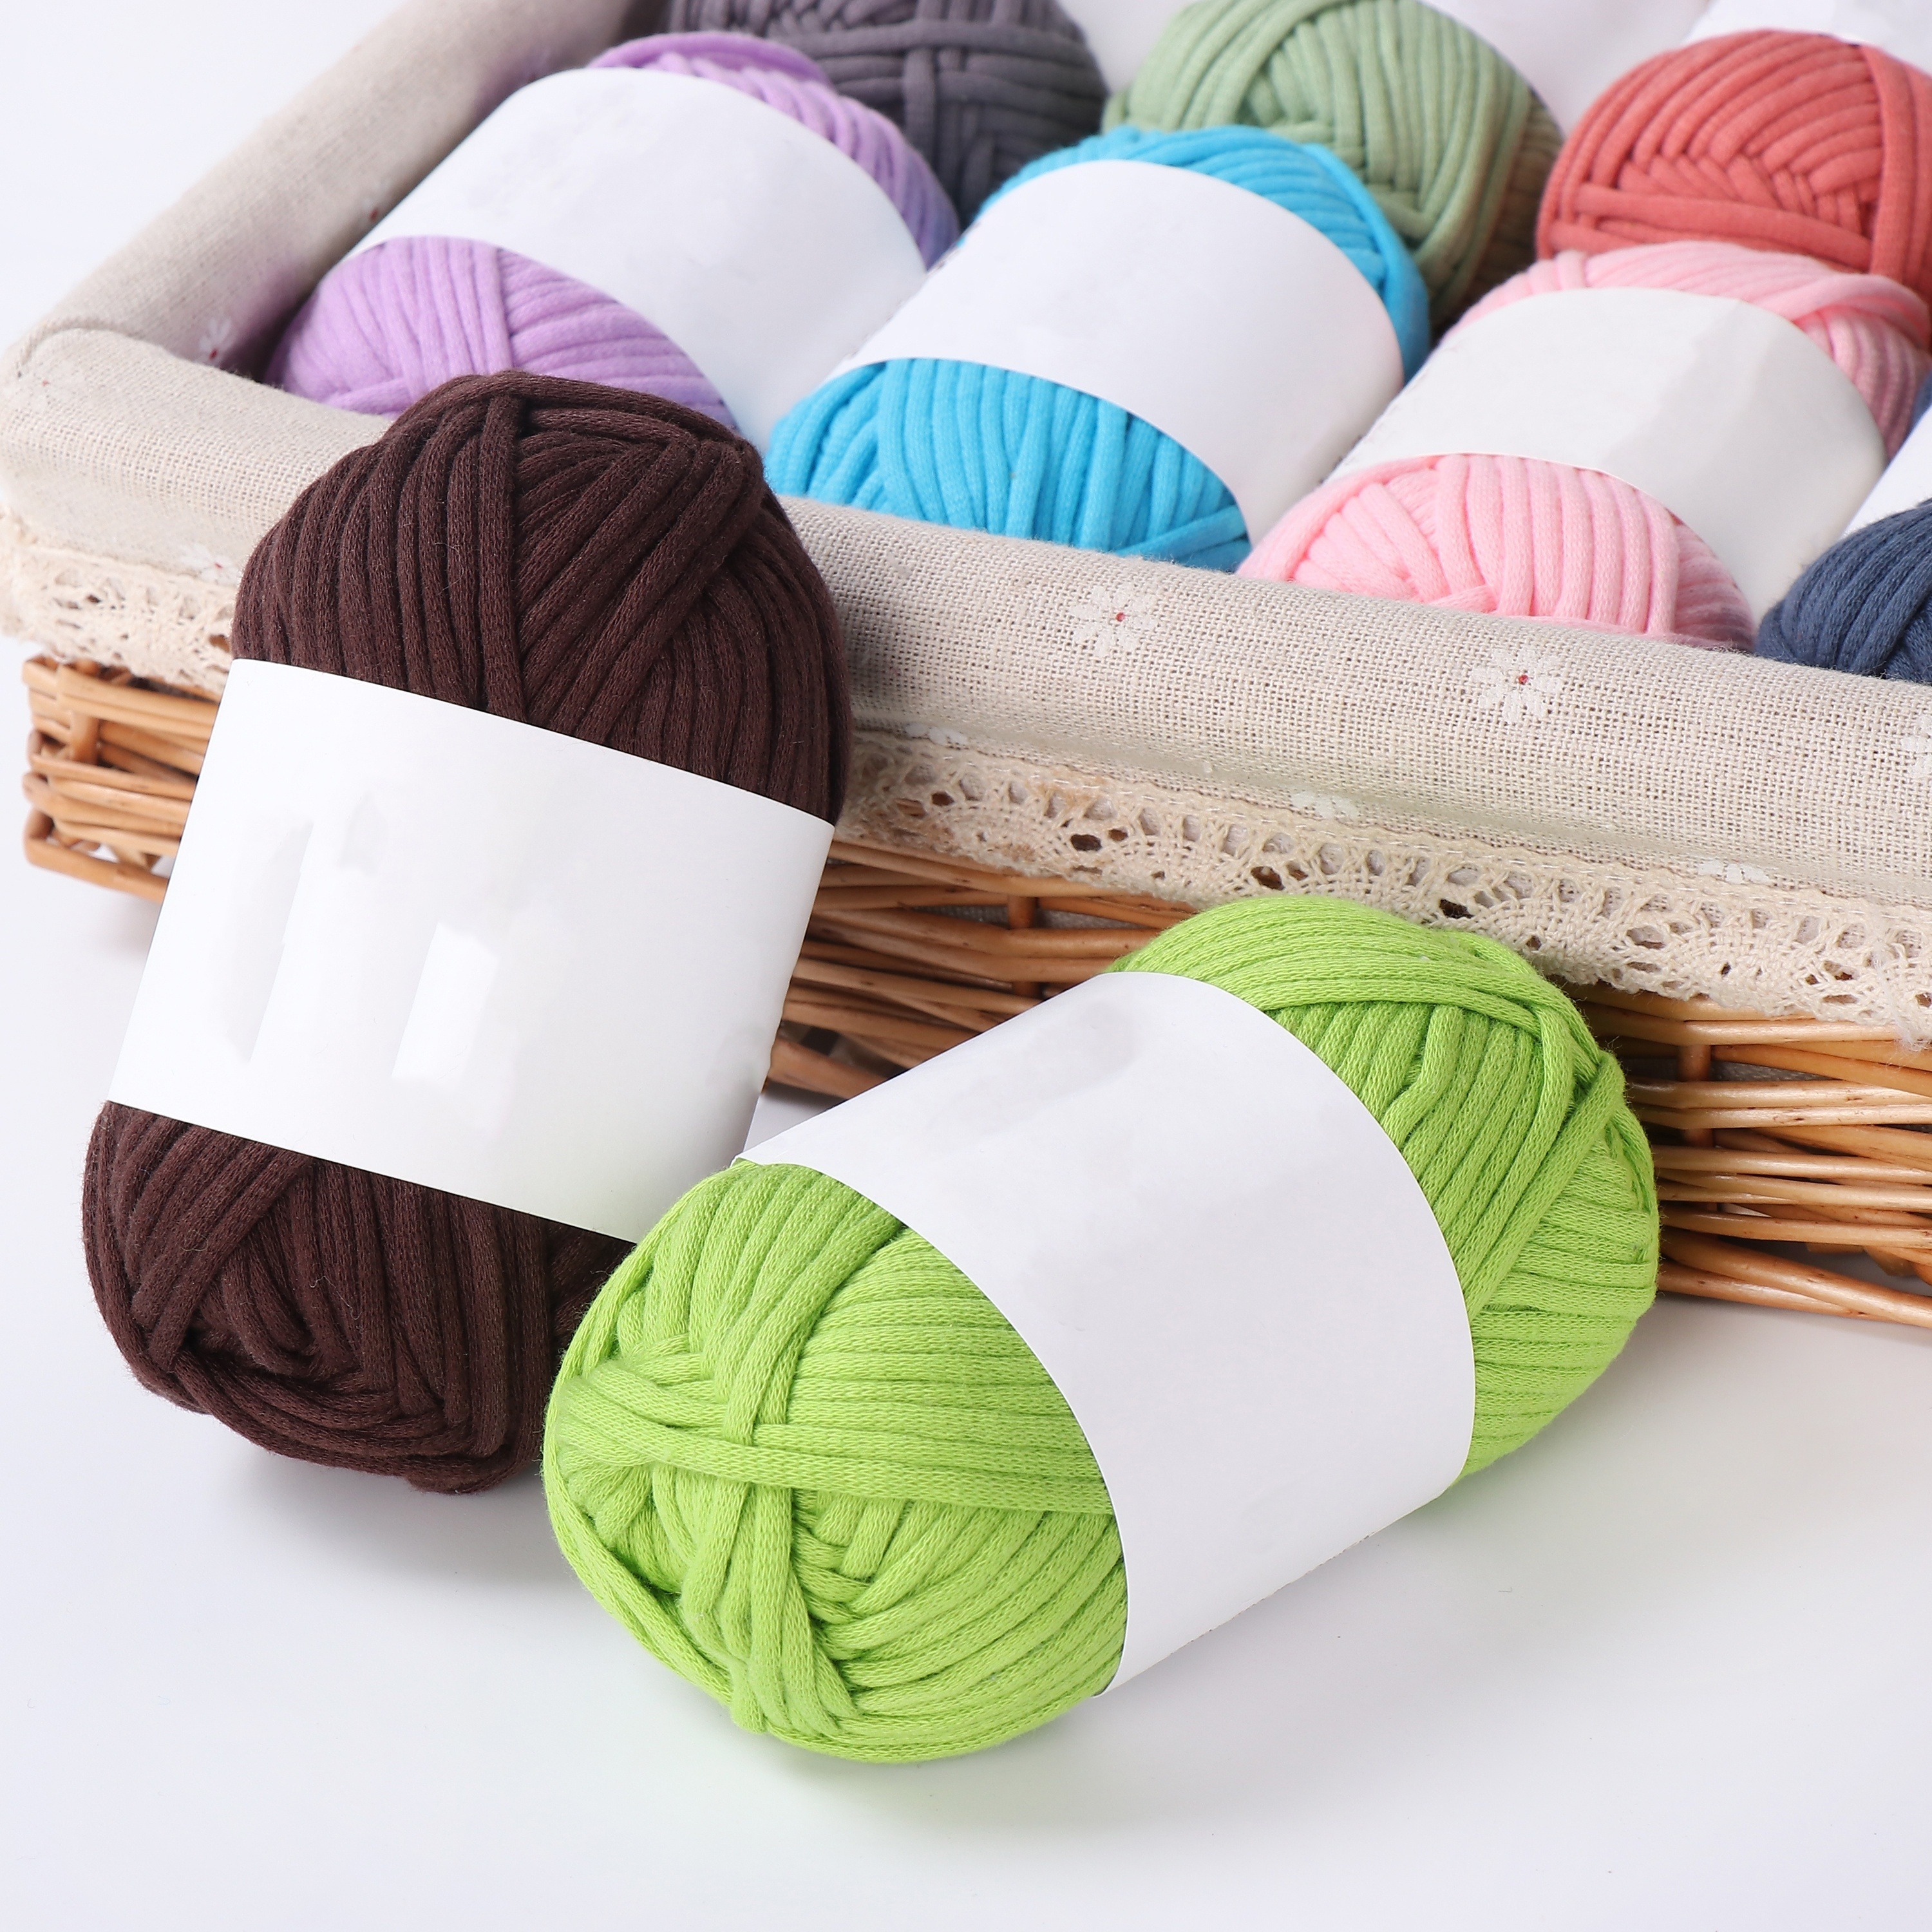  1PCS 100g Beginners White Yarn for Crocheting and  Knitting,Cotton Filling Yarn 60 Yards Cotton Nylon Blend Yarn with Stitches  for Hand DIY Bag Basket Dolls and Cushion